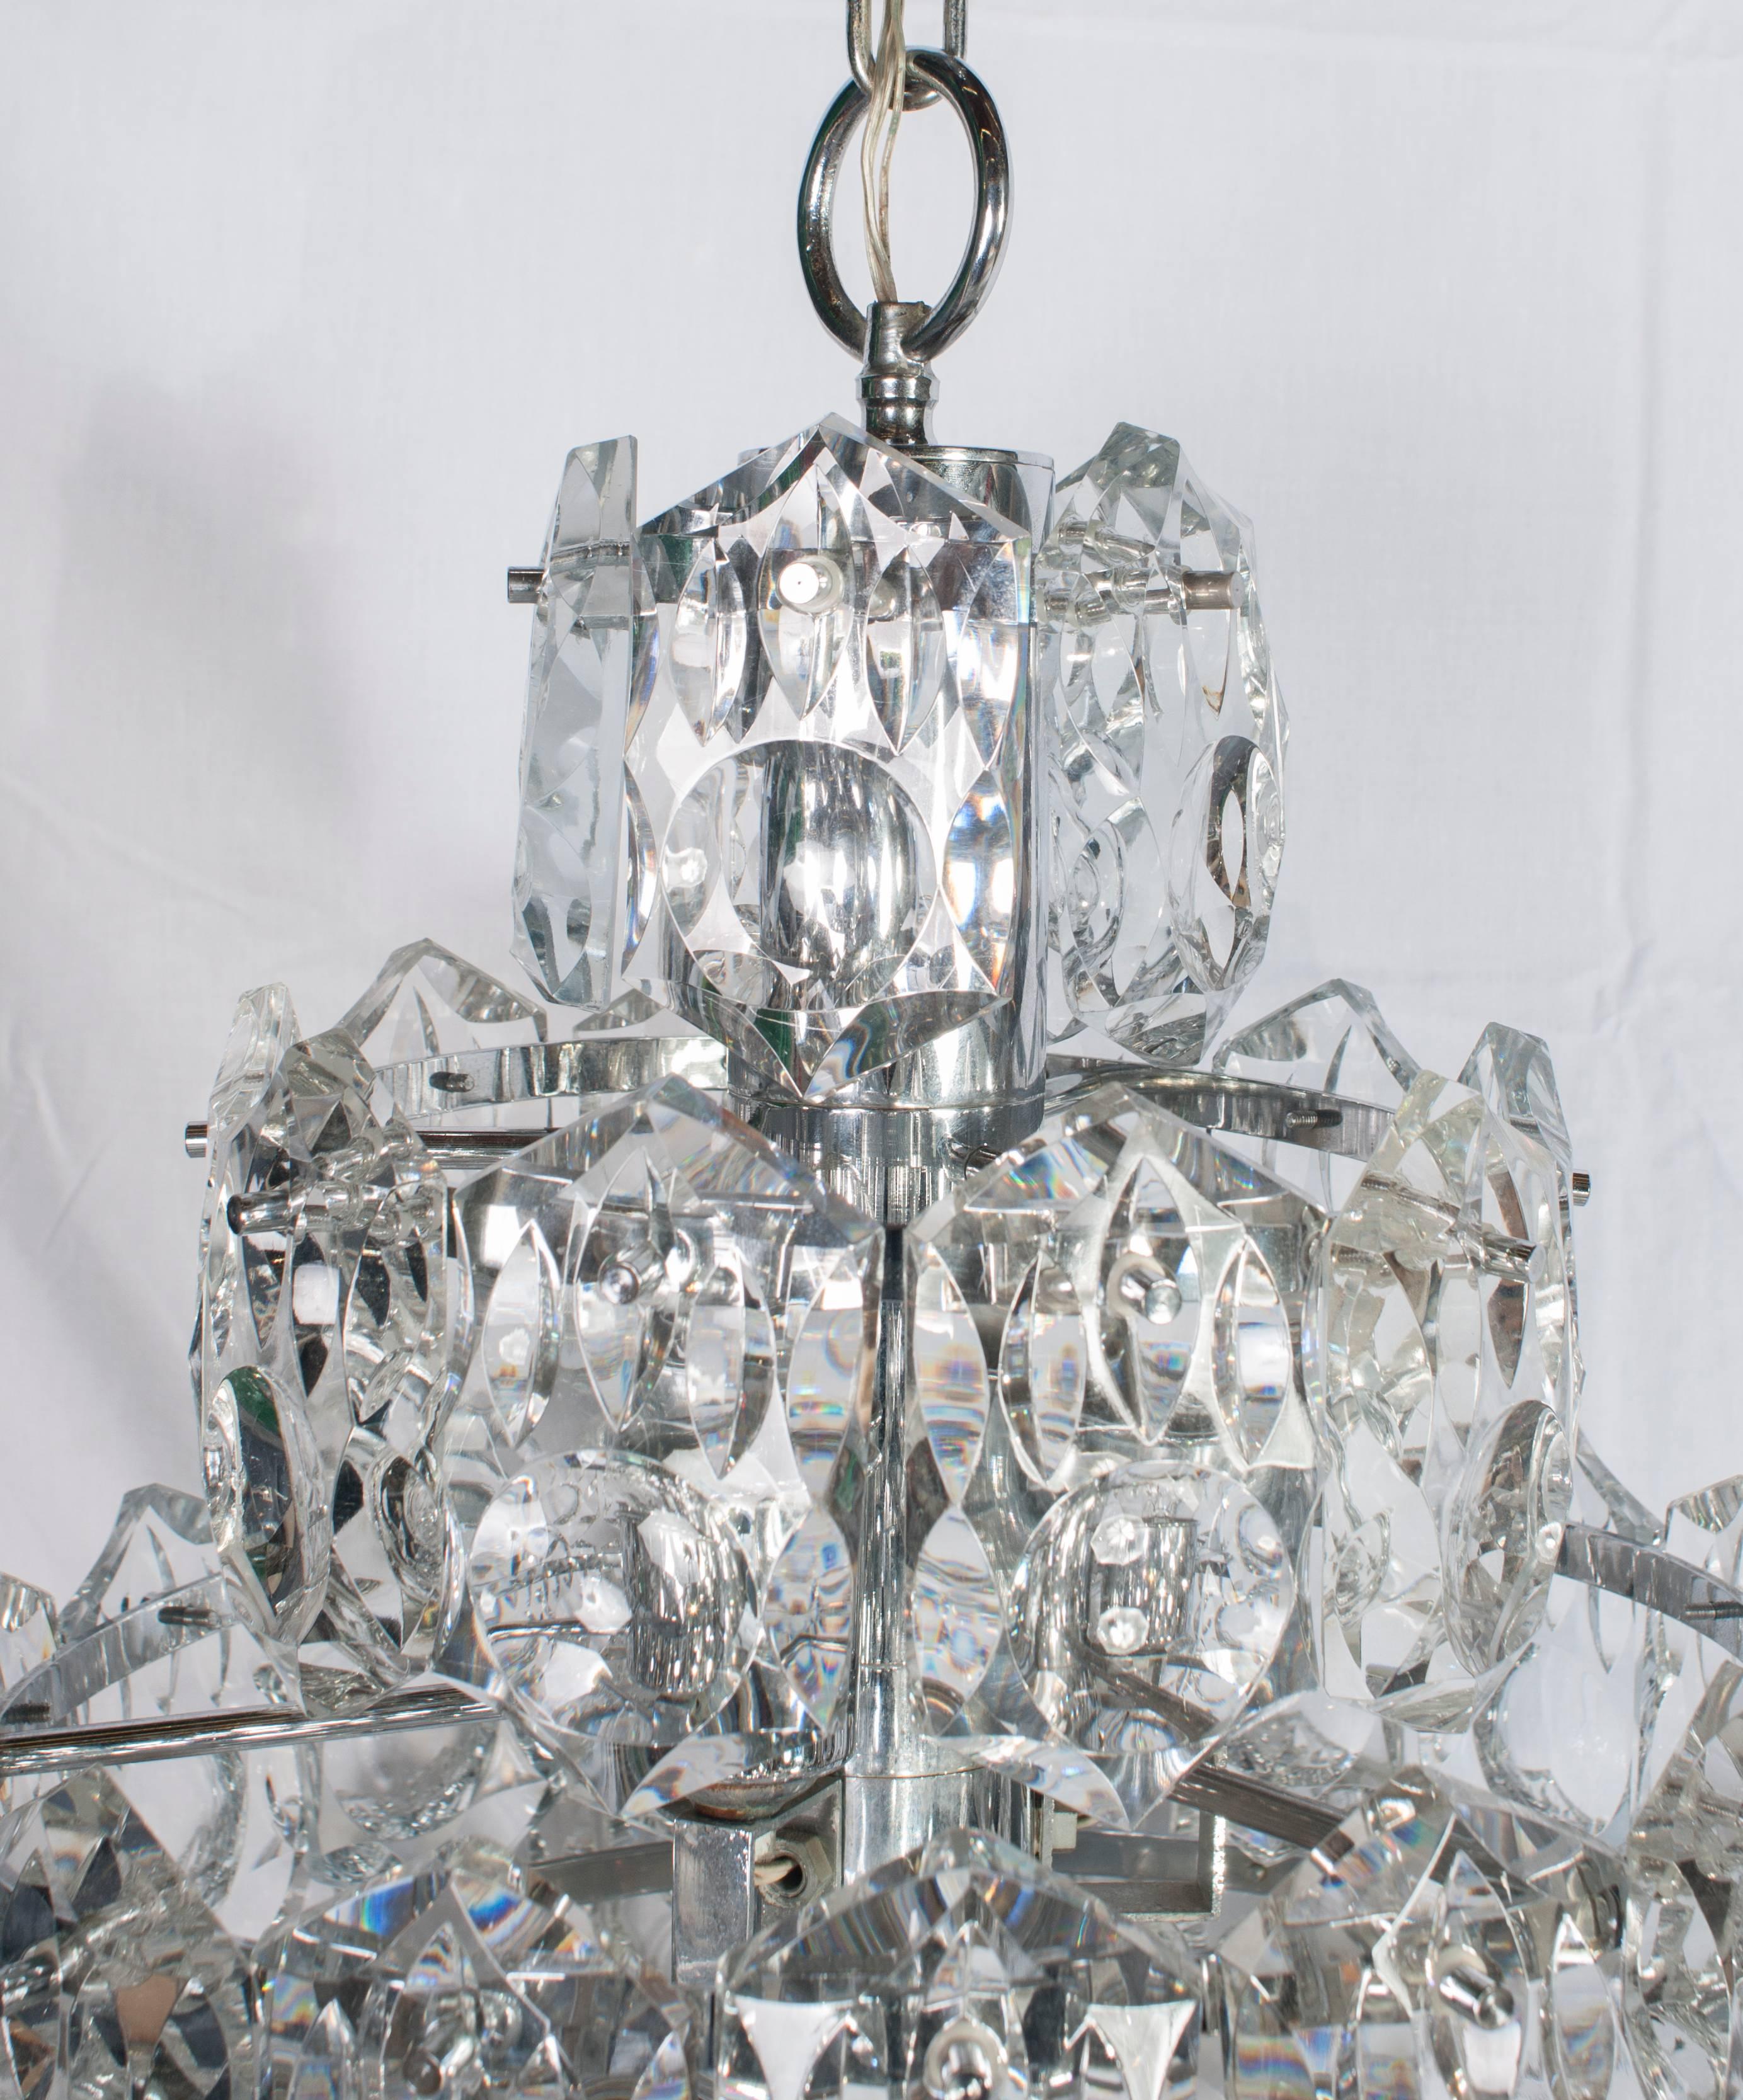 Superb quality Austrian glass chandelier of high quality.
This has been rewired to USA specification.